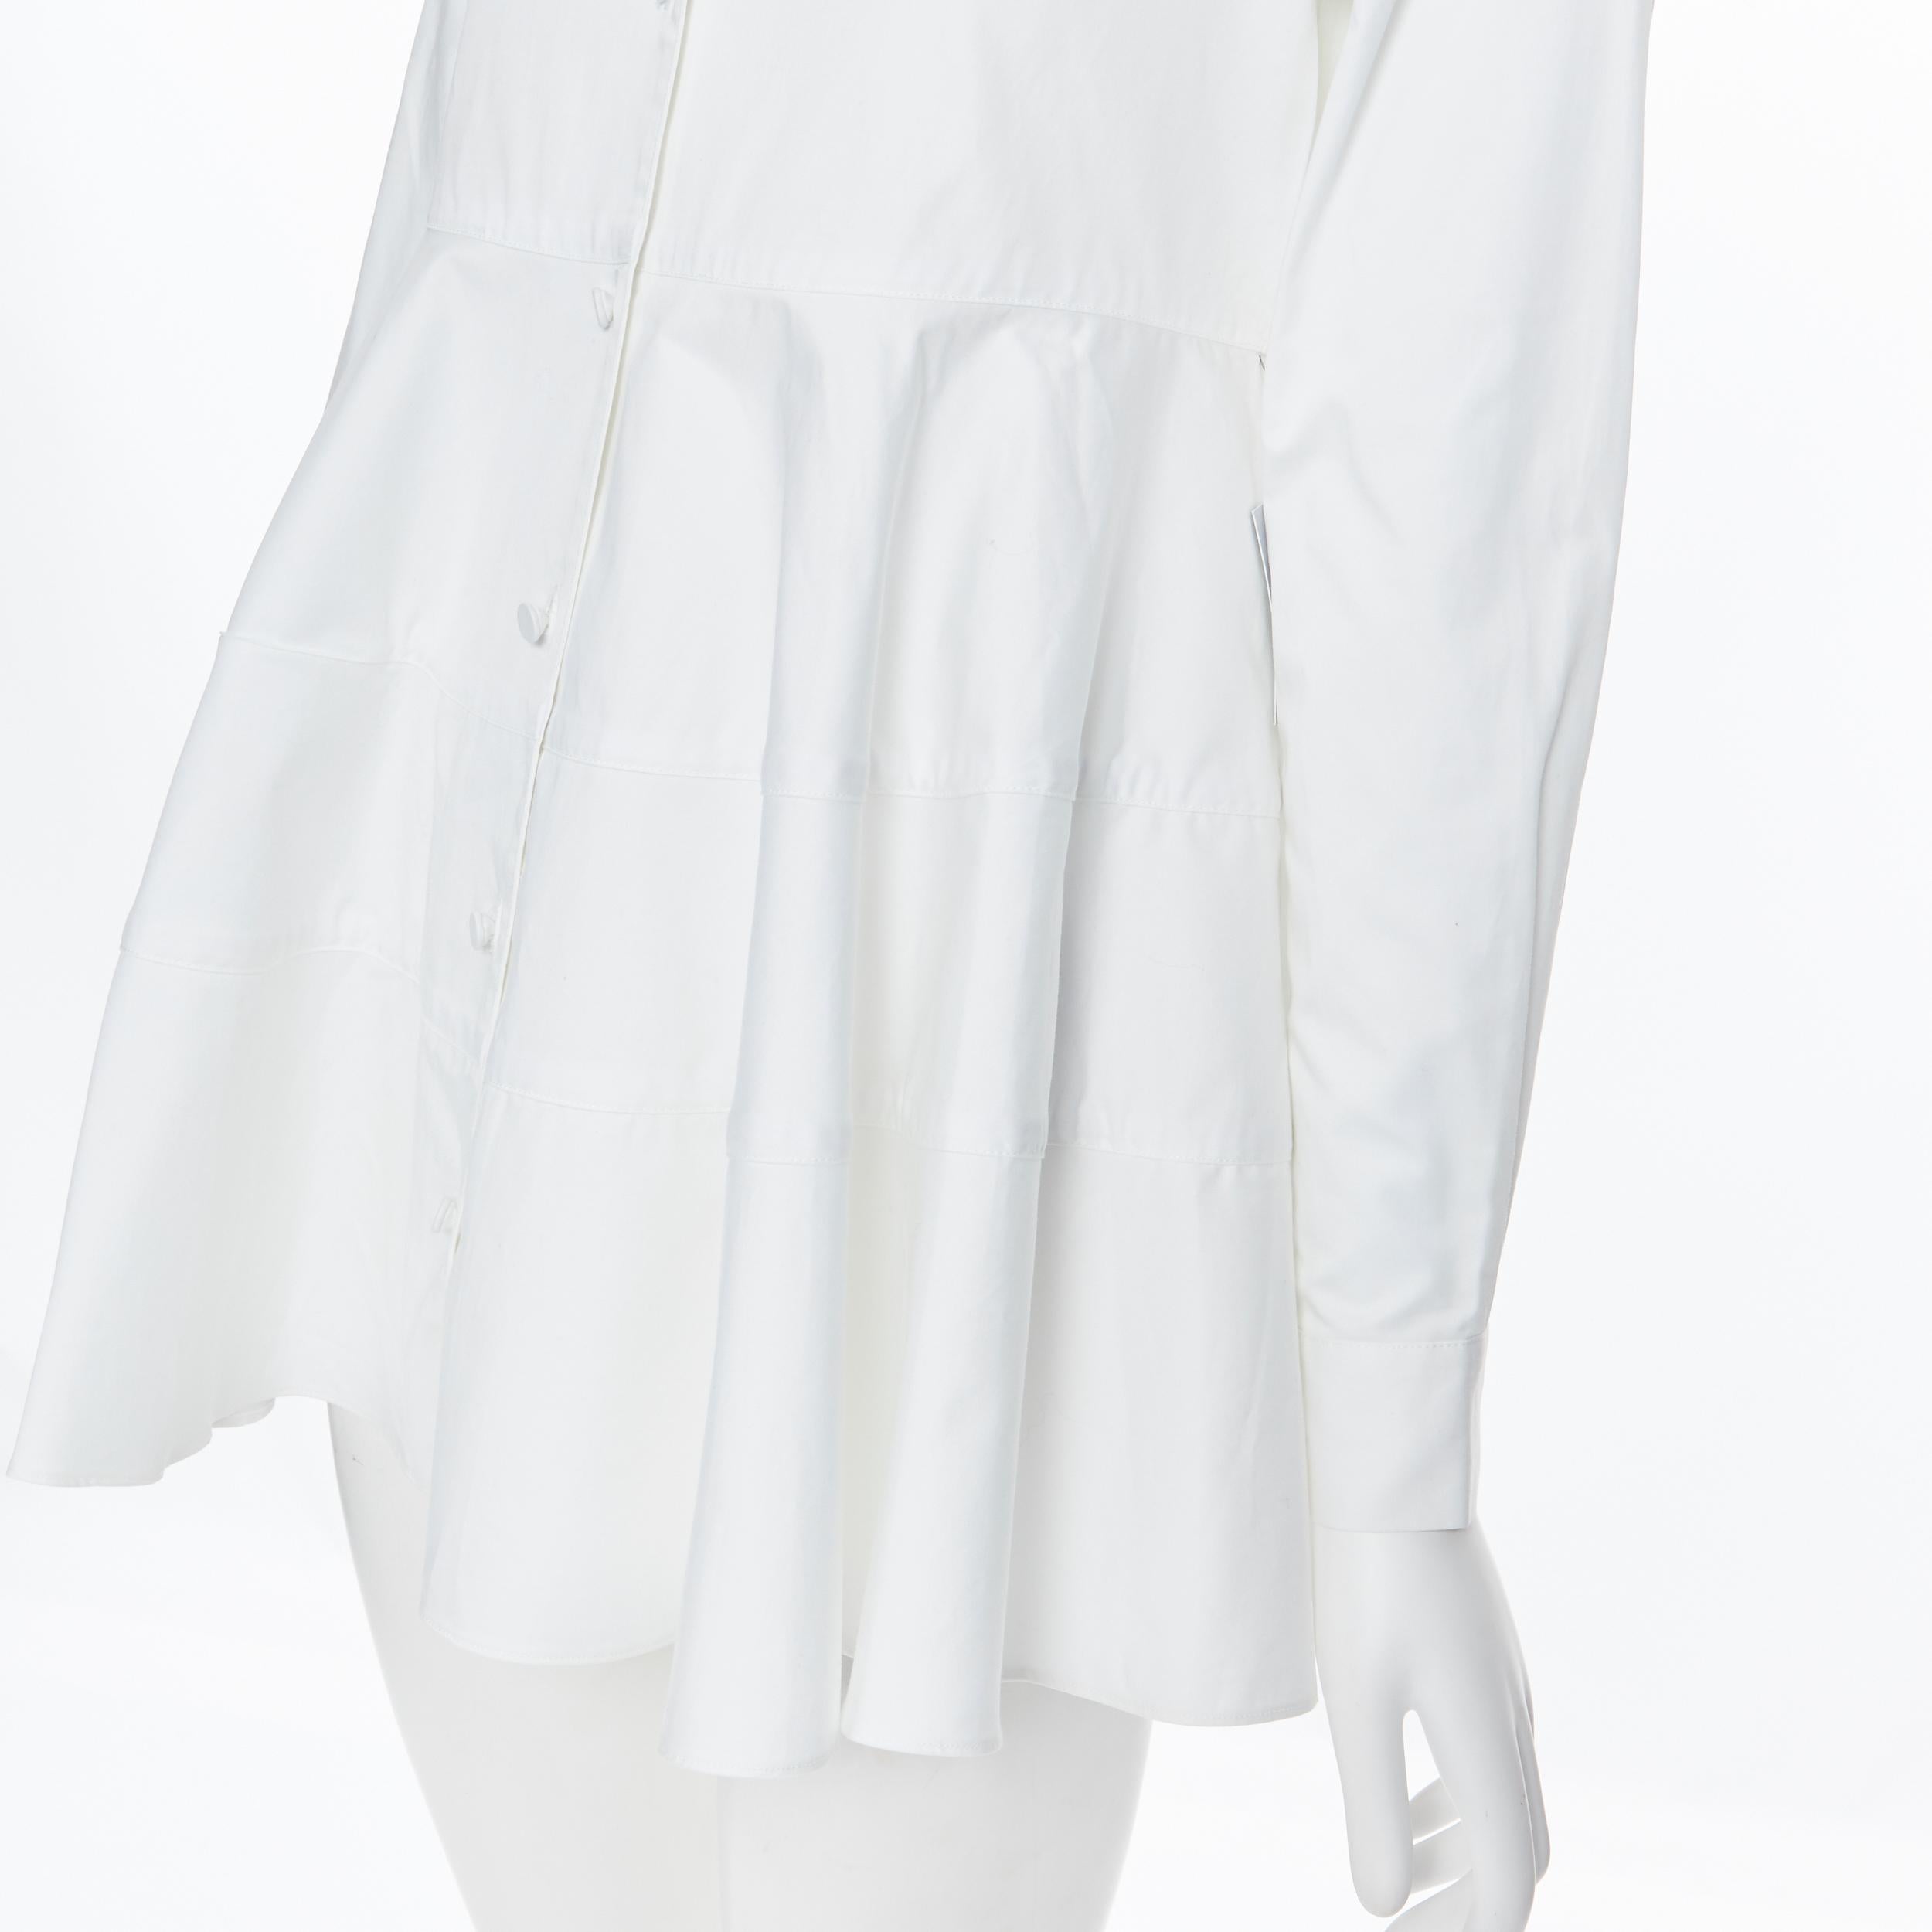 new CO COLLECTION ESSENTIALS white cotton tiered flared hem shirt top  XS
Brand: Co Collection
Model Name / Style: Flared shirt
Material: Cotton
Color: White
Pattern: Solid
Closure: Button
Extra Detail: Tiered flared hem. Tunic shirt Collared